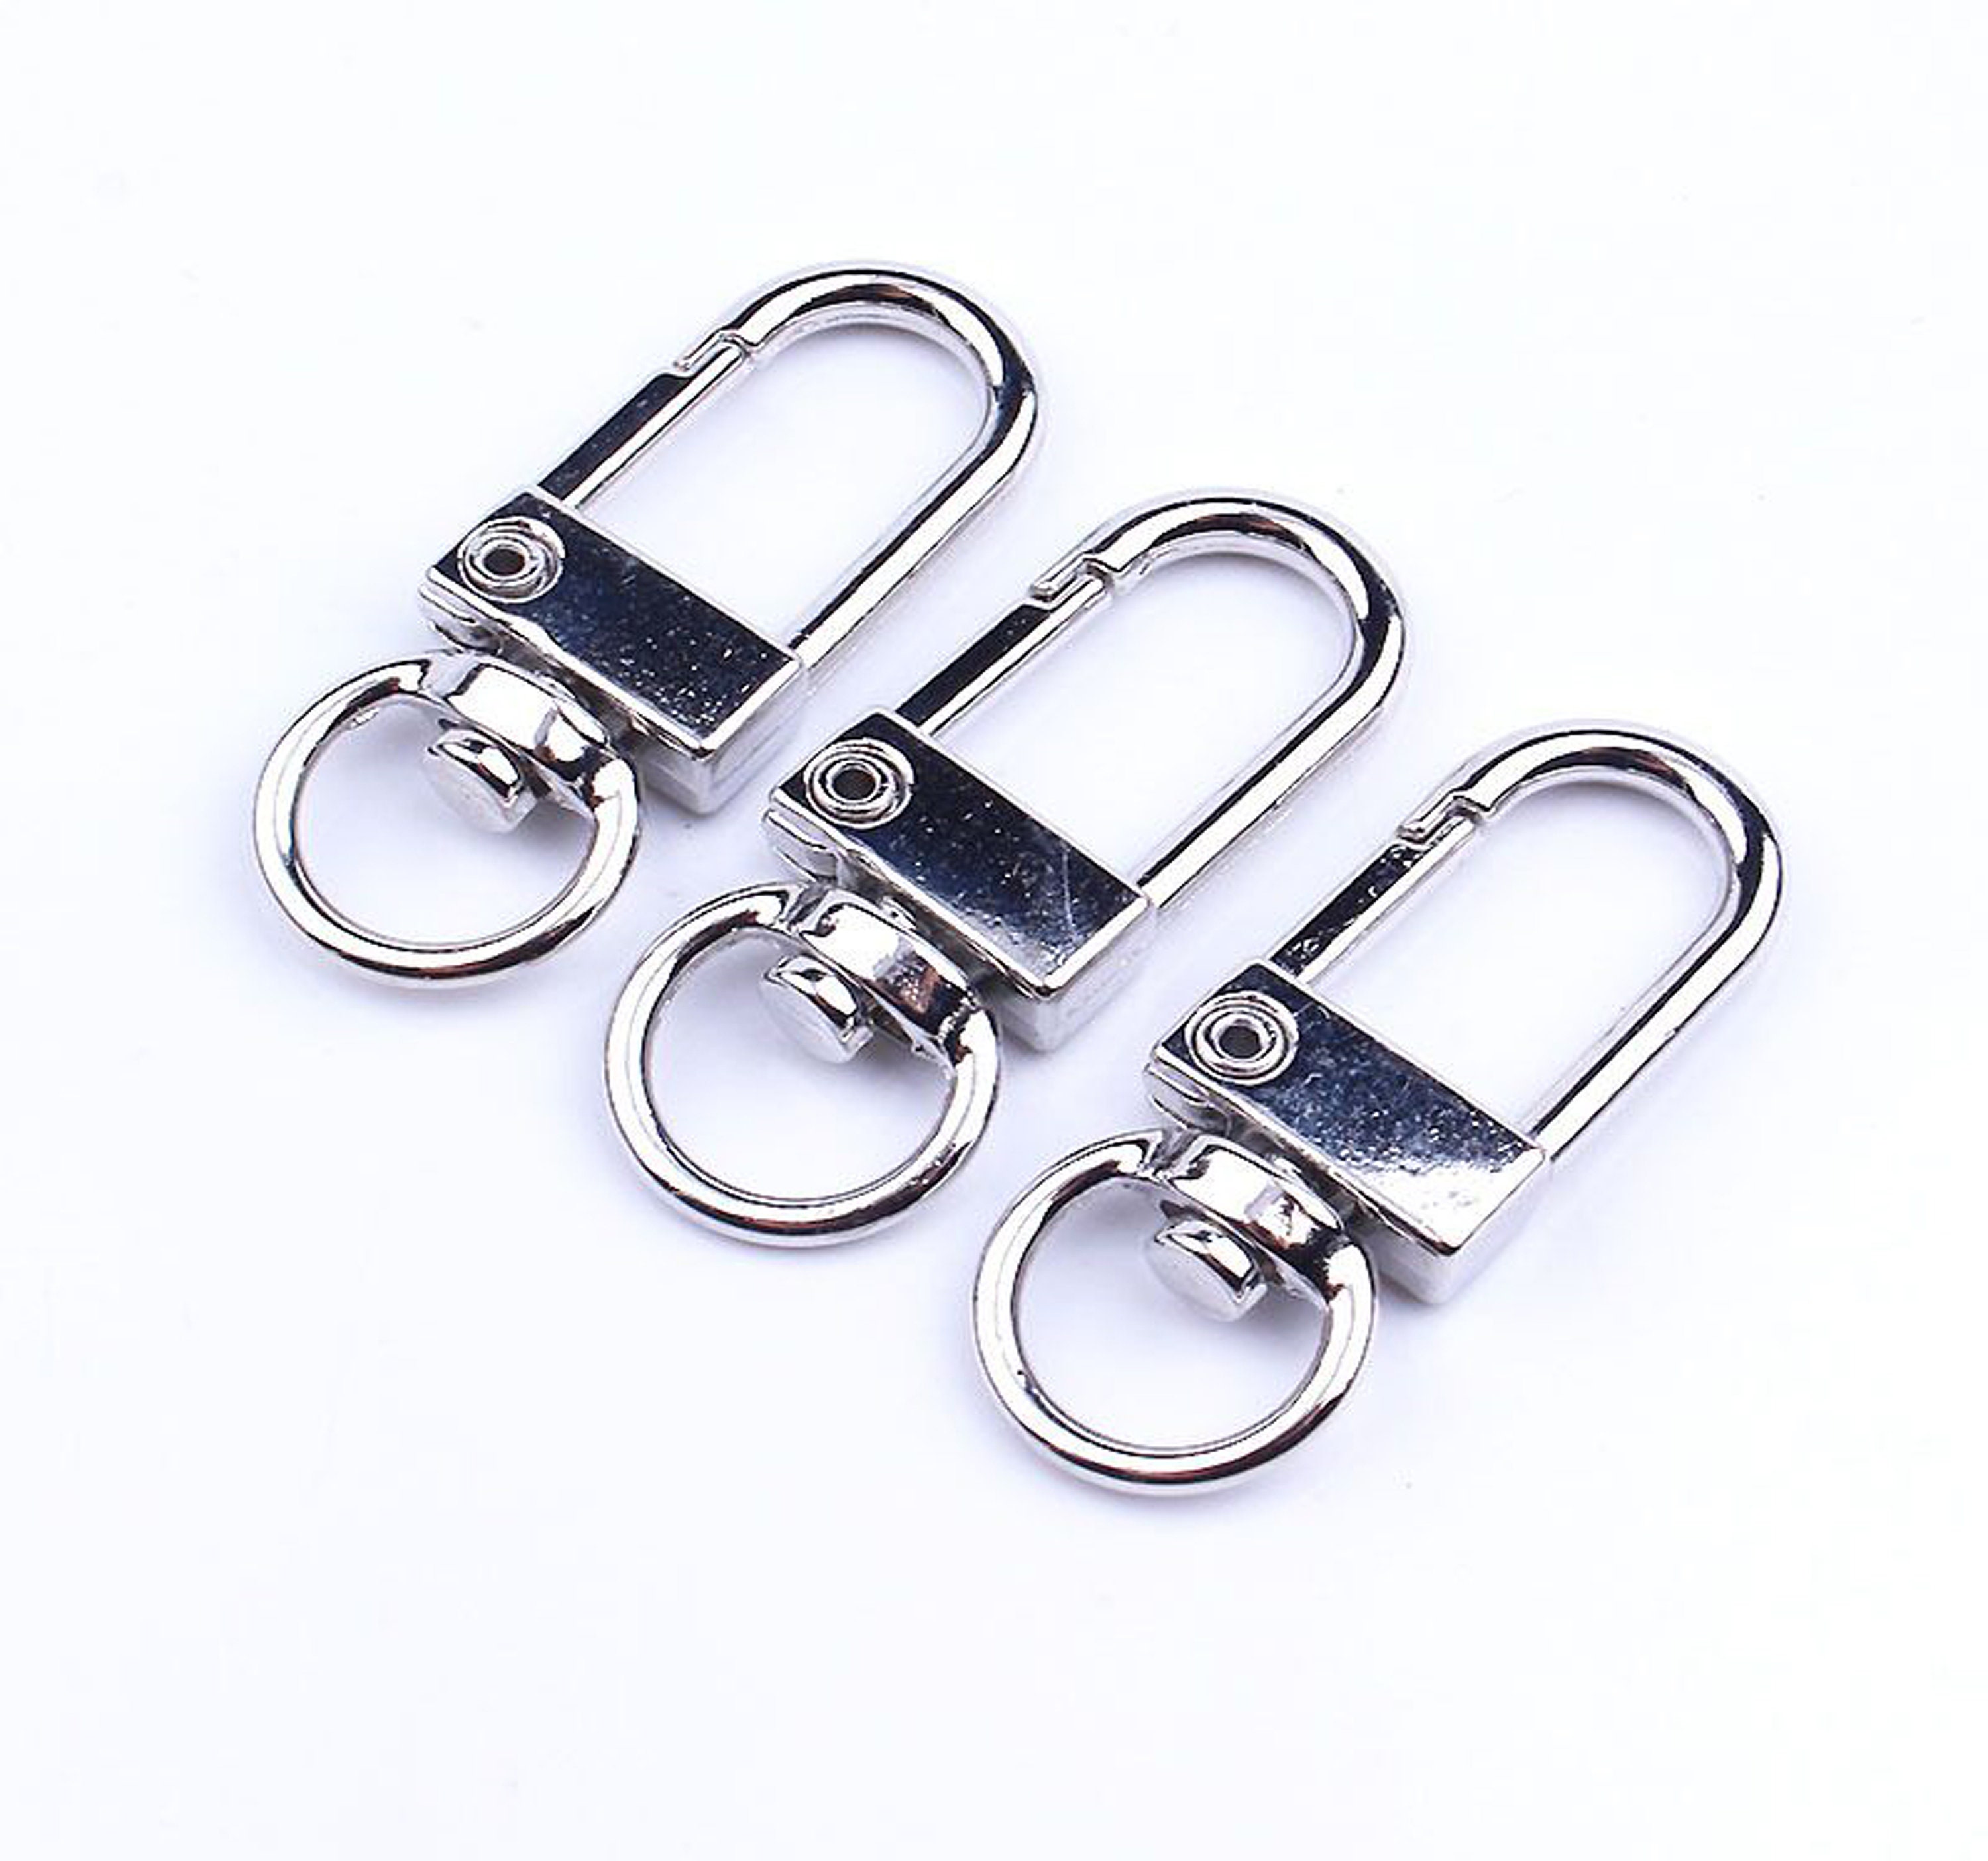 50 Silver Swivel Clasps For DIY Bling Lanyard Keyring, And Split Key Rings  Lobster Claw Clasp Included From Smalliram, $13.69